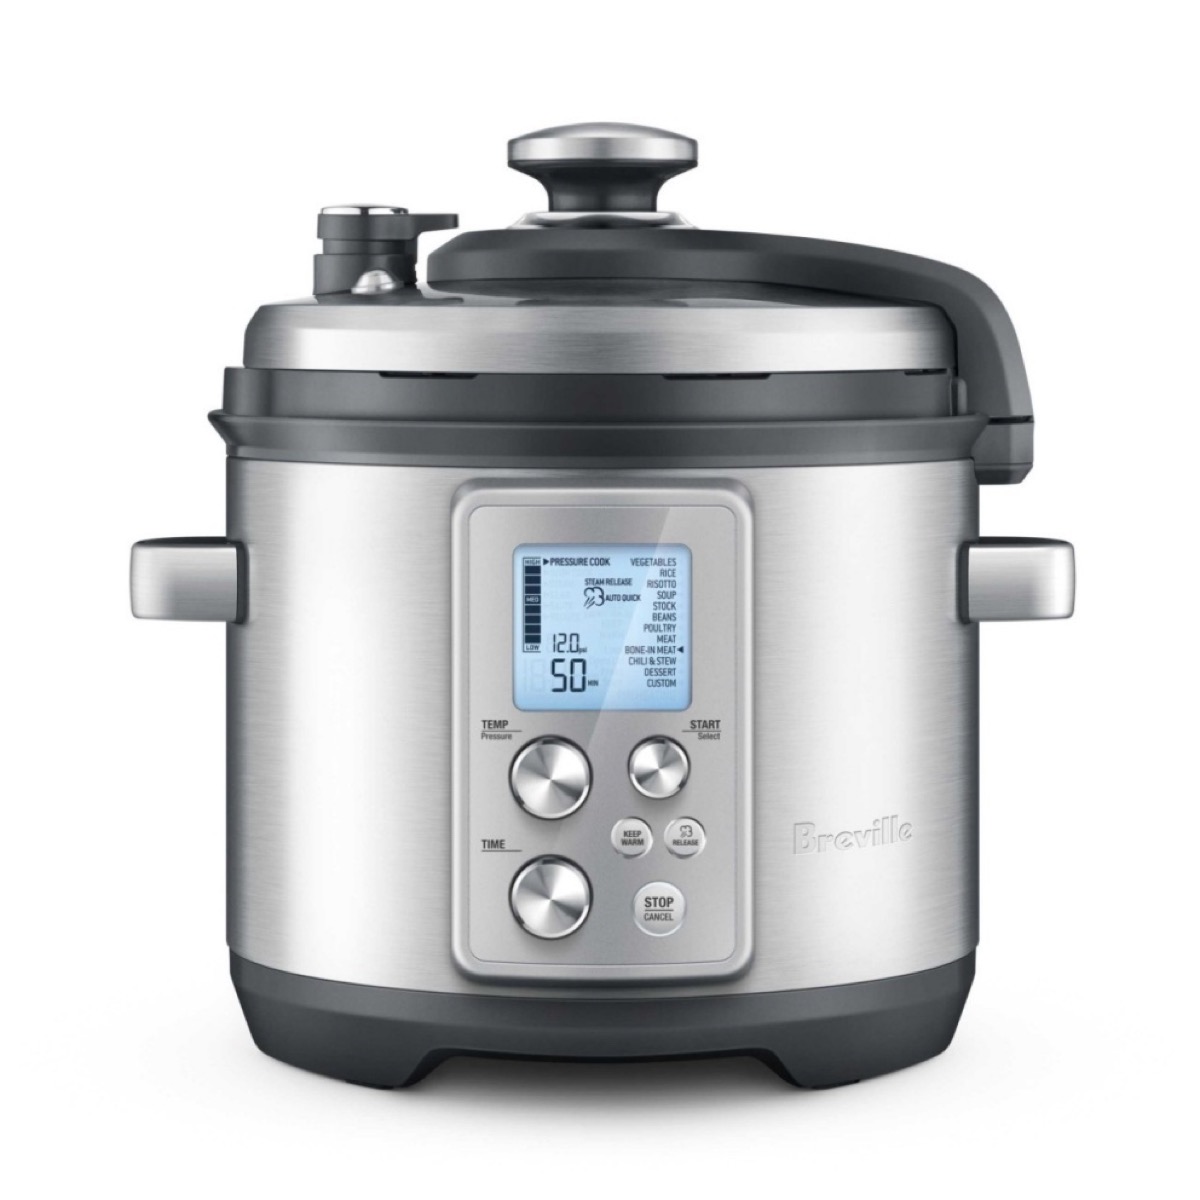 breville pressure cooker, father's day gifts, gifts for dad